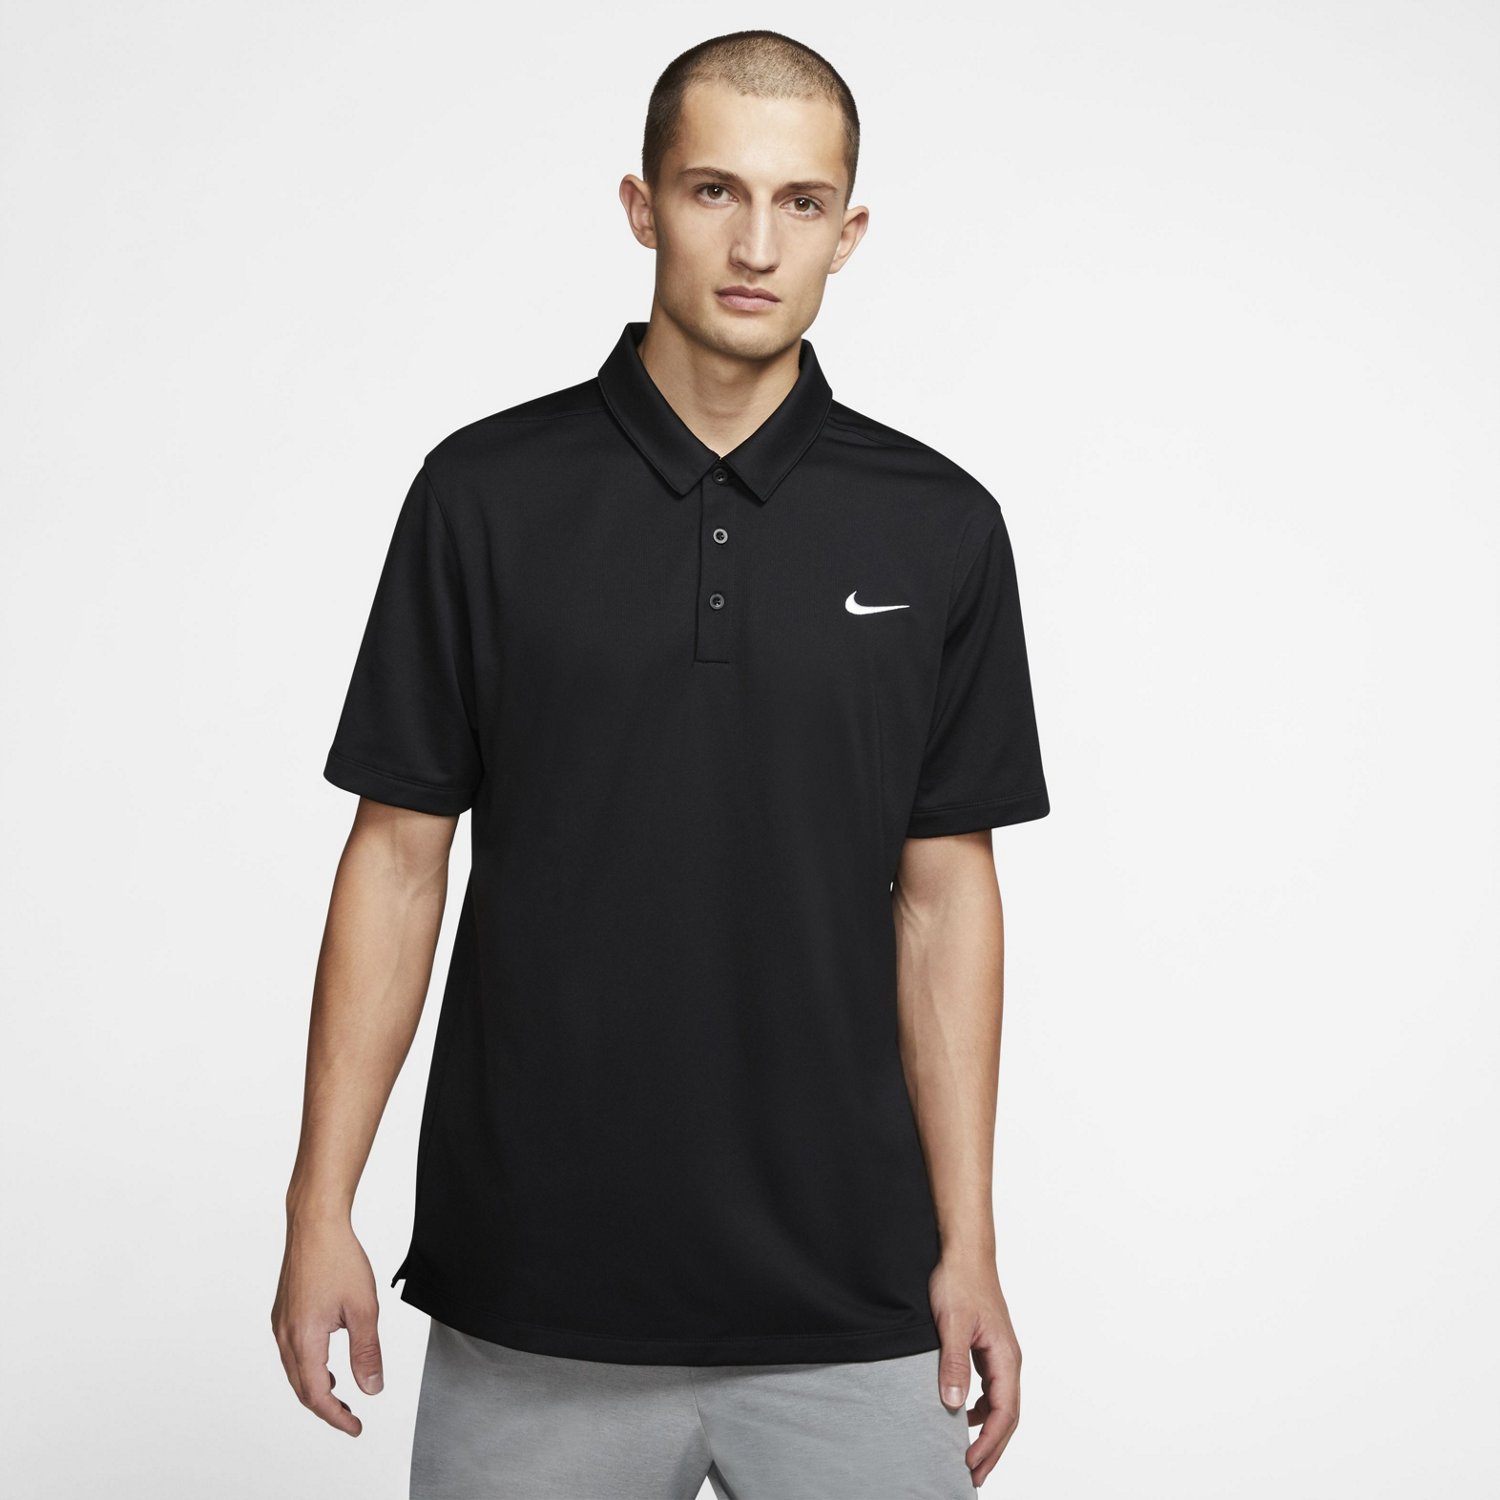 skive perle ned Nike Men's Dri-FIT Football Polo Shirt | Free Shipping at Academy